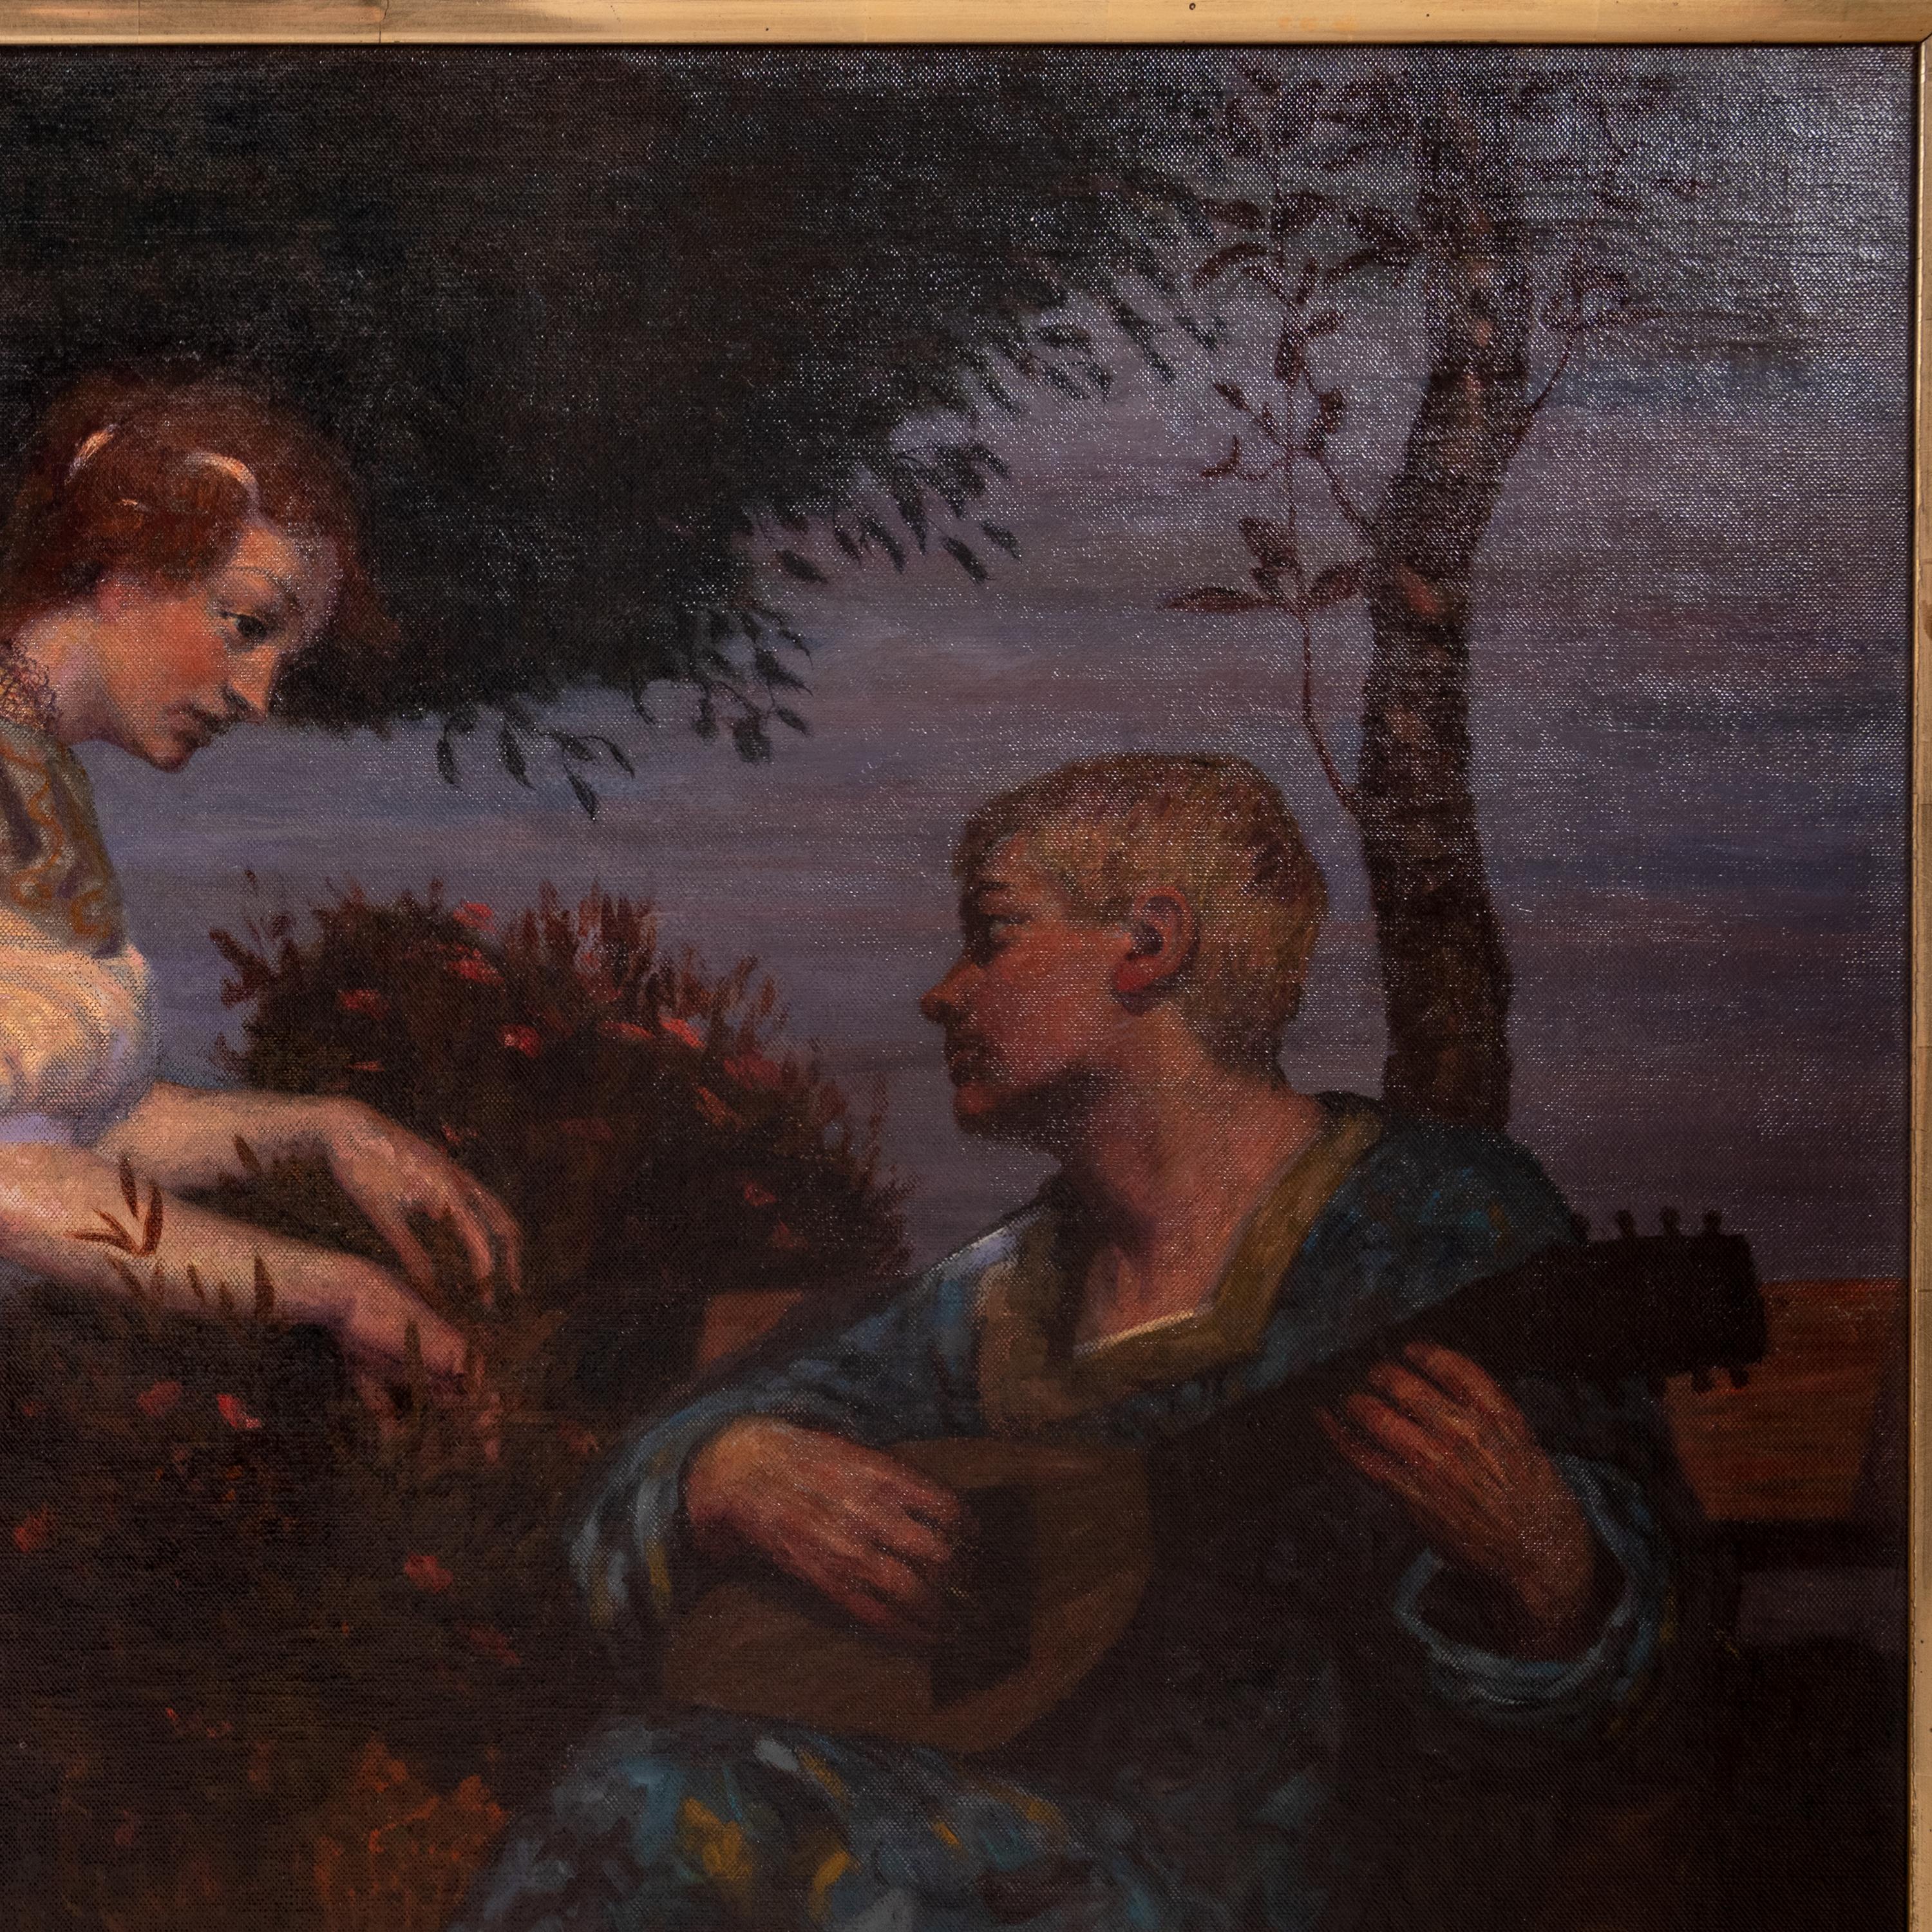 A Large and impressive antique oil on canvas Pre-Raphaelite painting by the German artist, Hermann Frobenius (1871-1954), signed and dated 1900.
Frobenius had classical training and studied both in Rome and Florence, he later was in the circle of